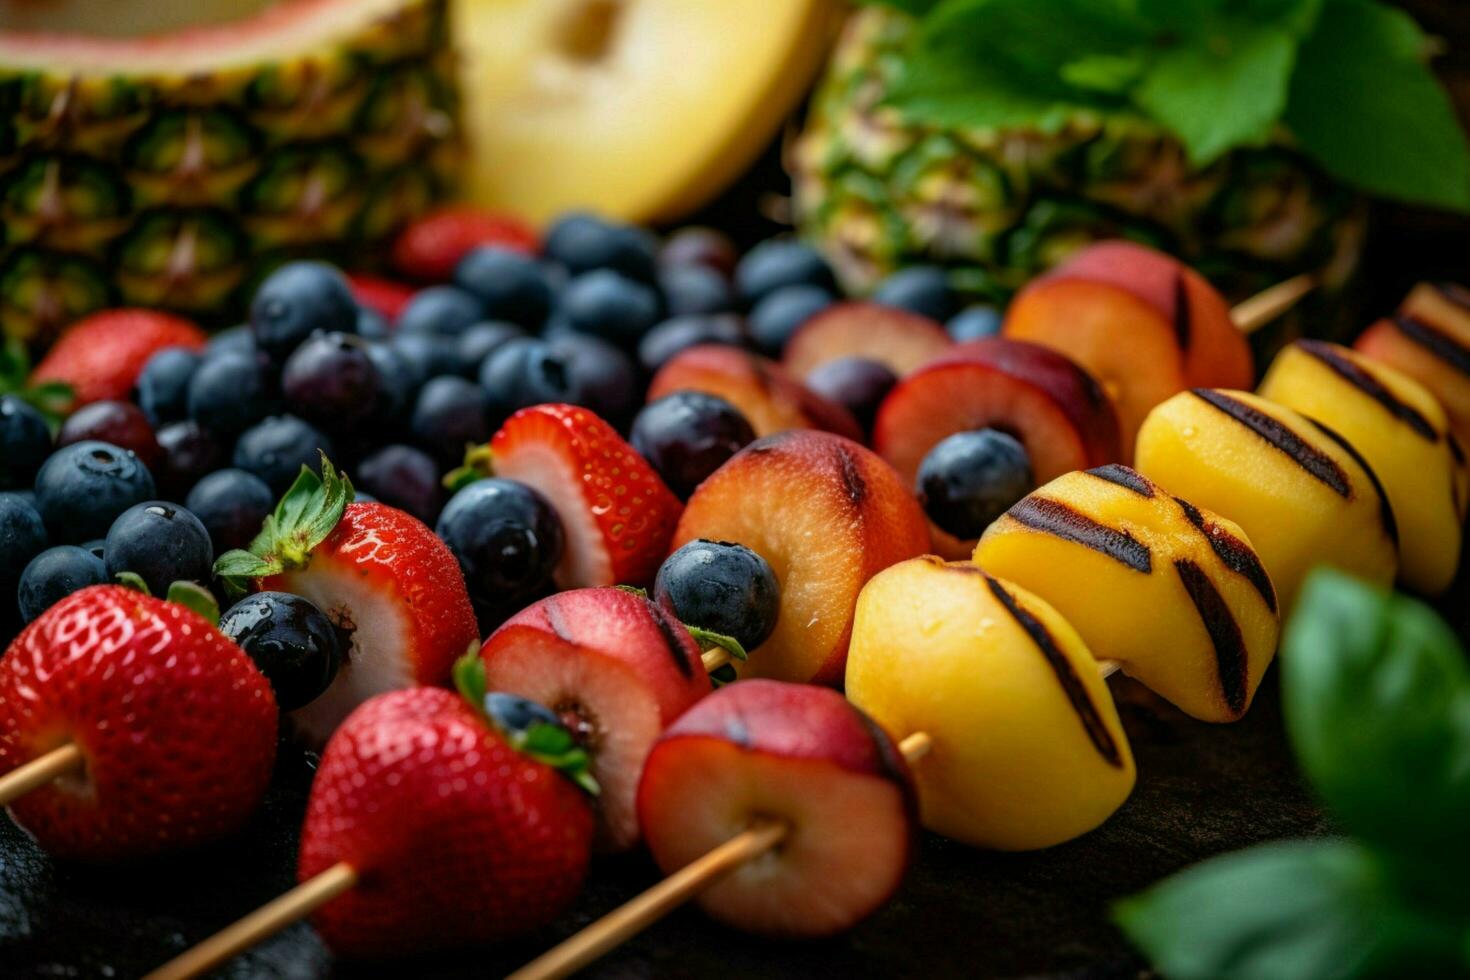 Skewers of fresh fruit including pineapple peach an photo